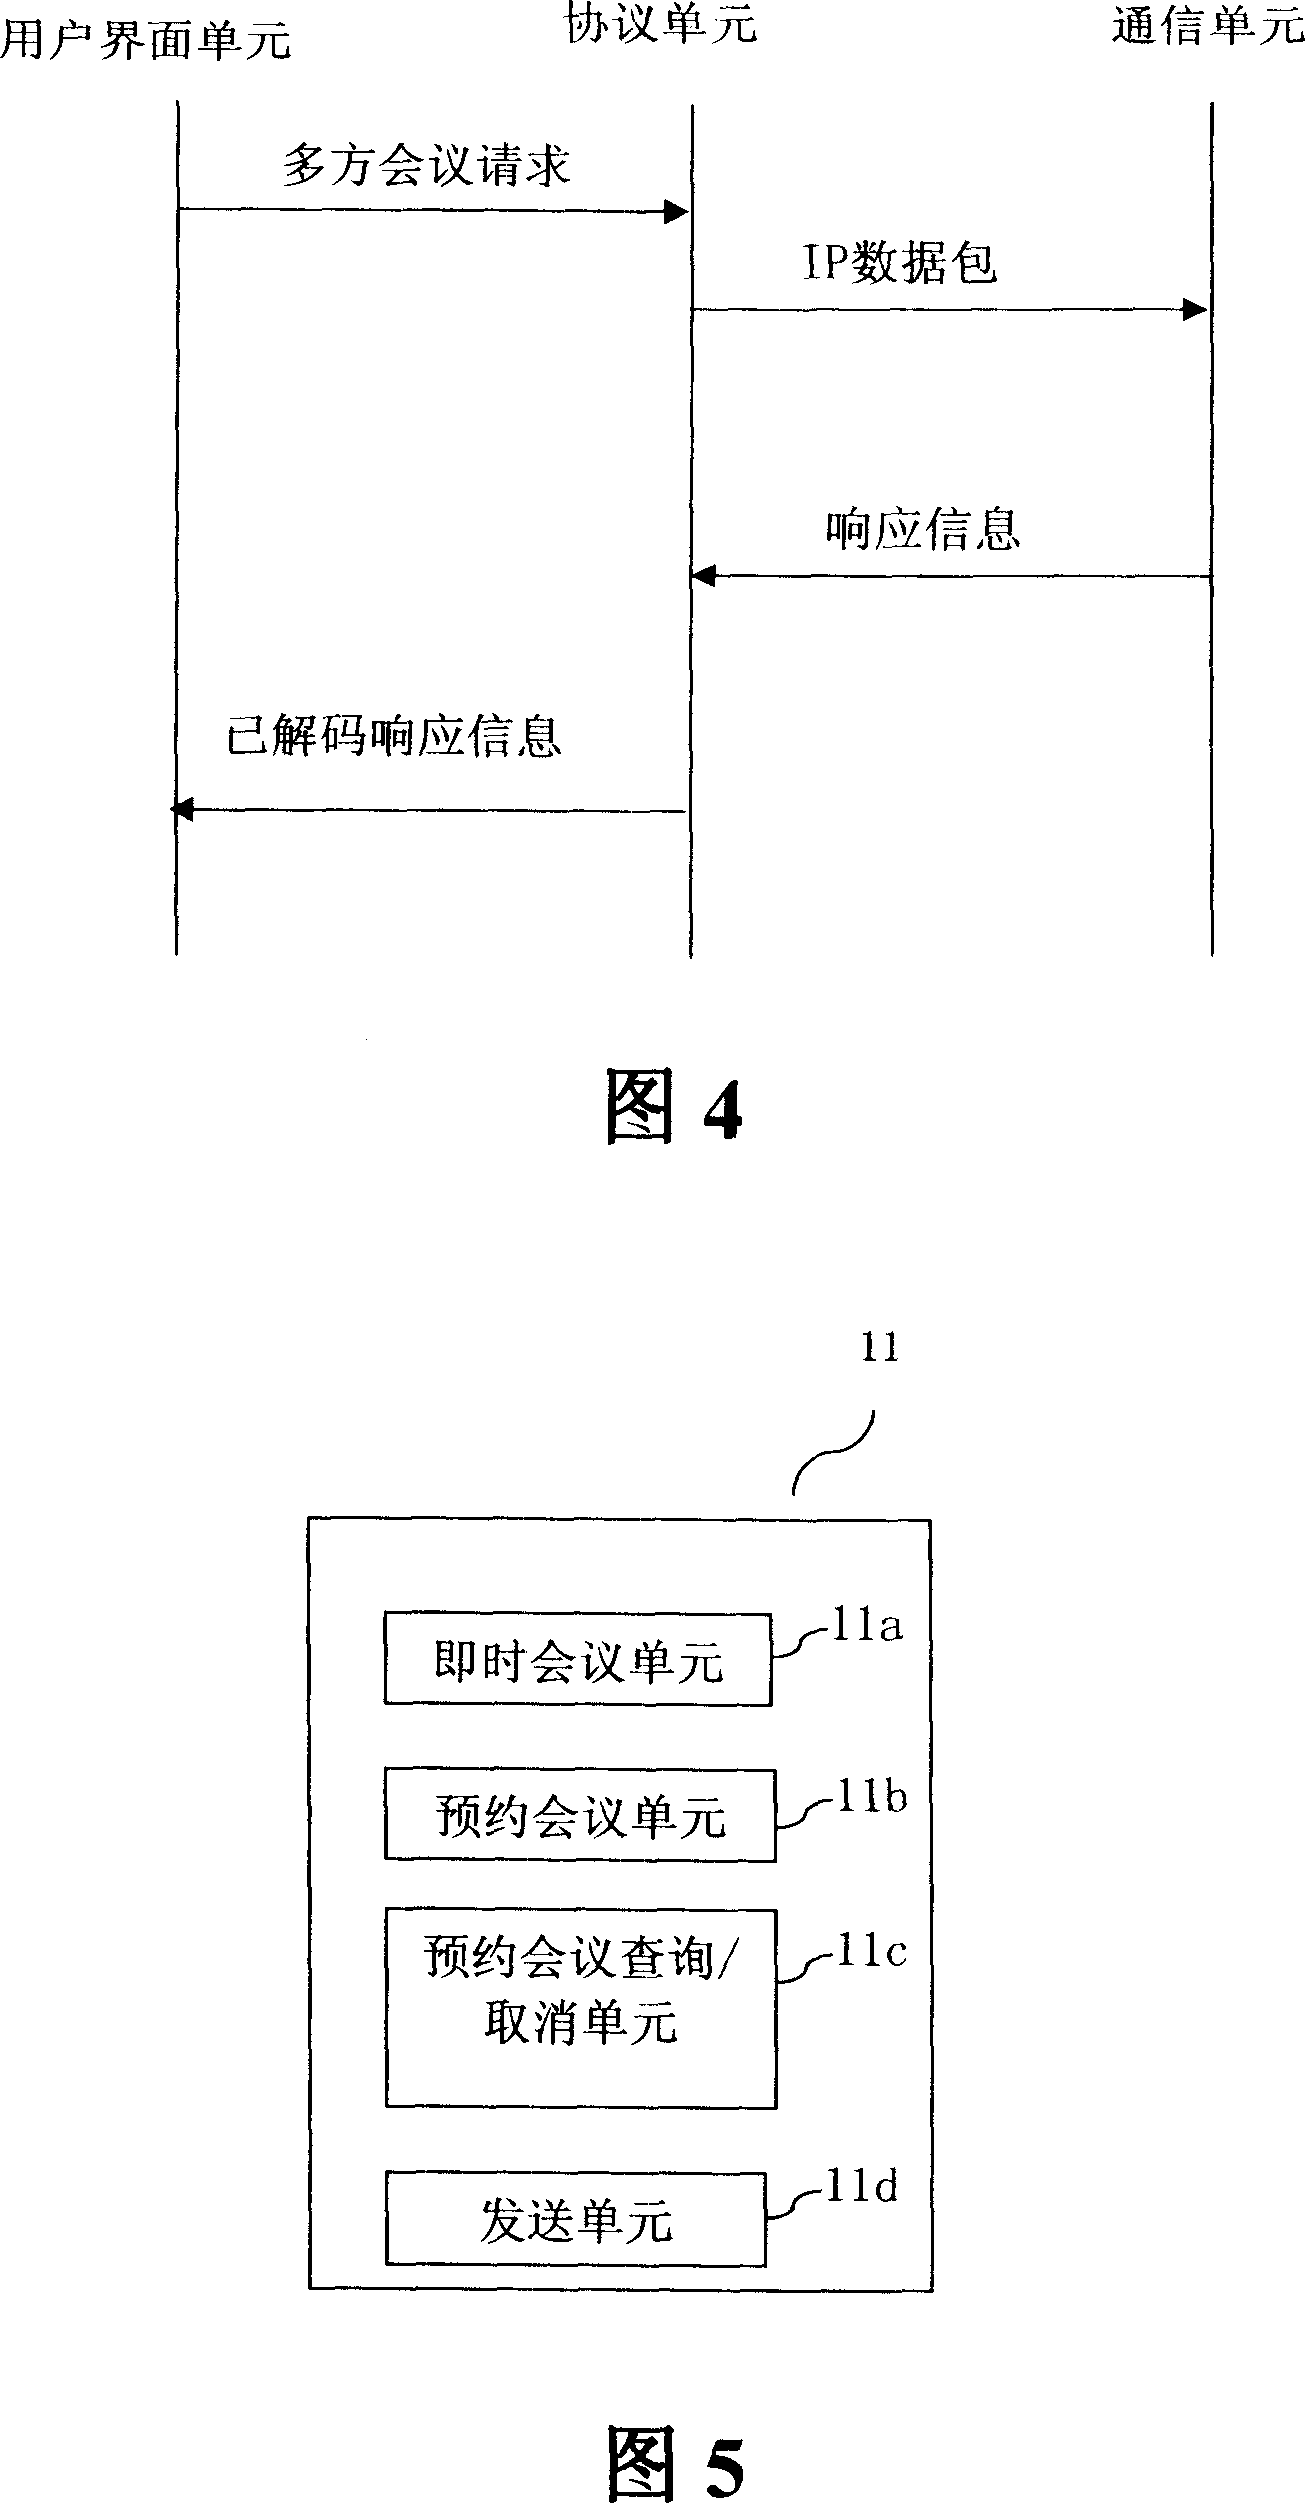 A multi-party conference device and multi-party conference system and method